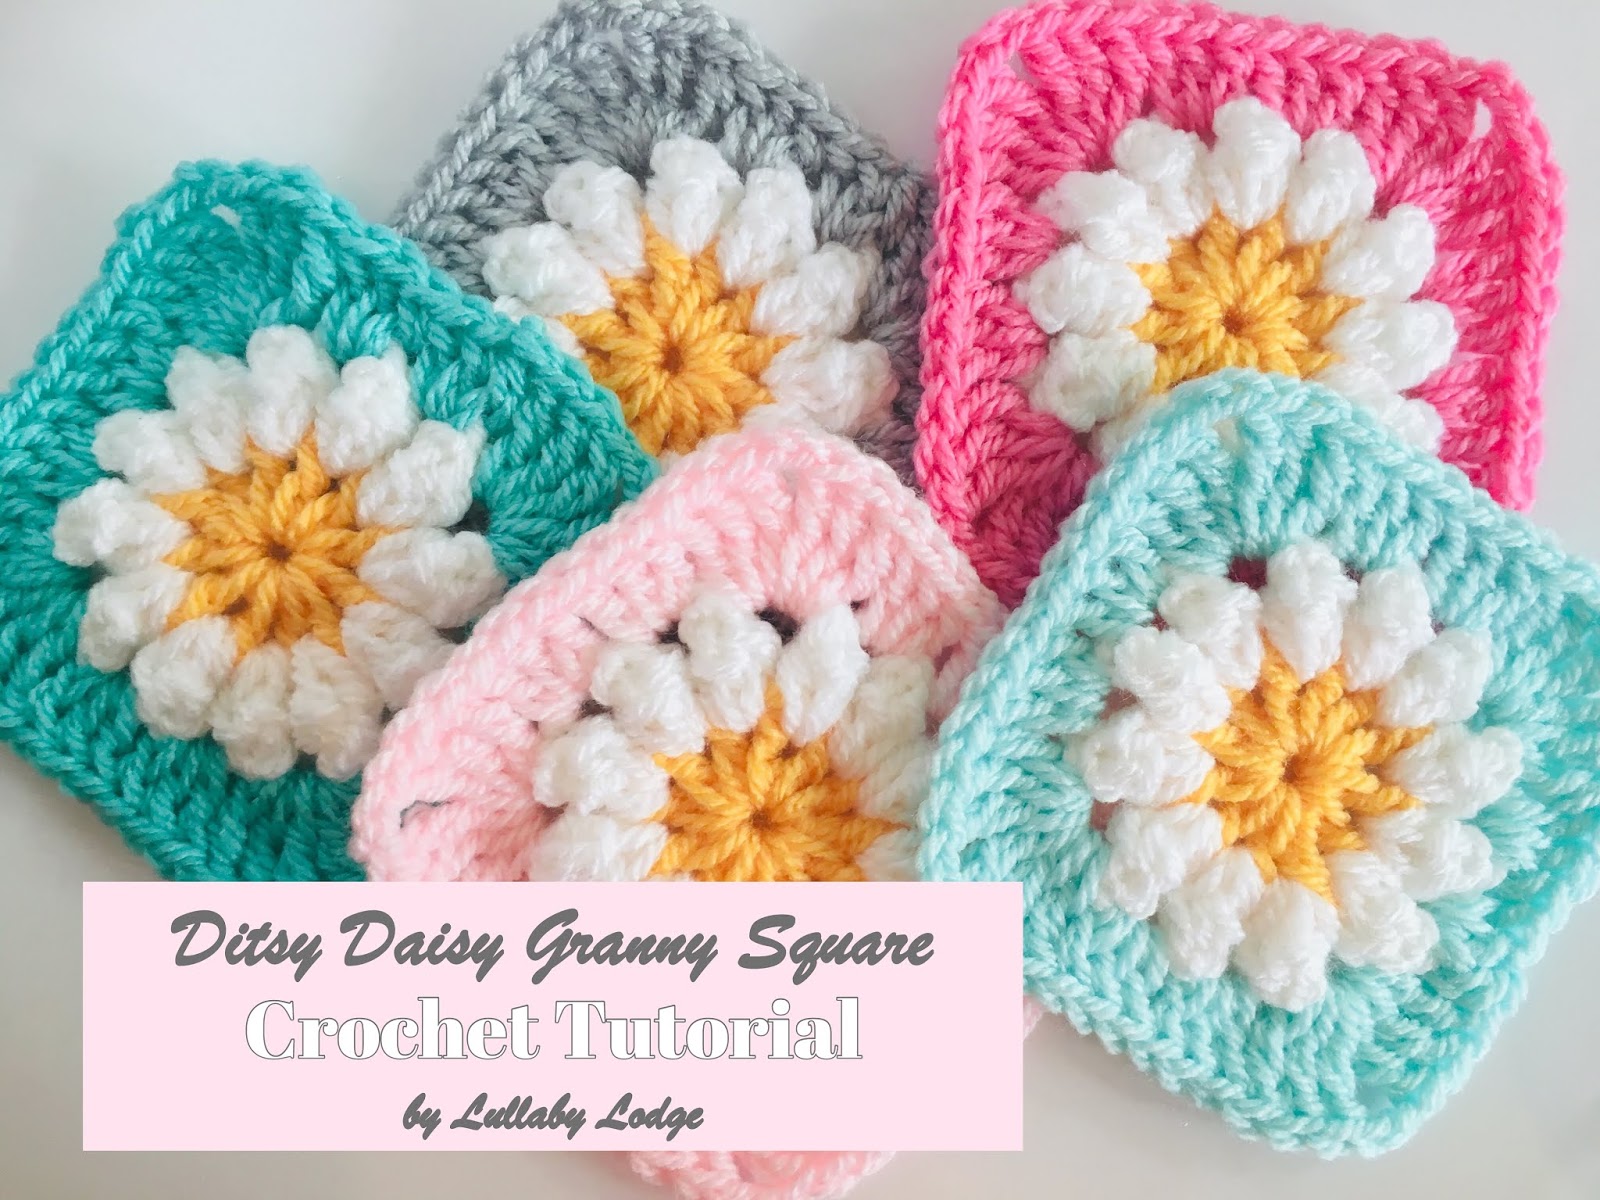 Lullaby Lodge Daisy Granny Squares Learn How To Make Them In This Crochet Tutorial By Lullaby Lodge,2 Player Two Player Card Games